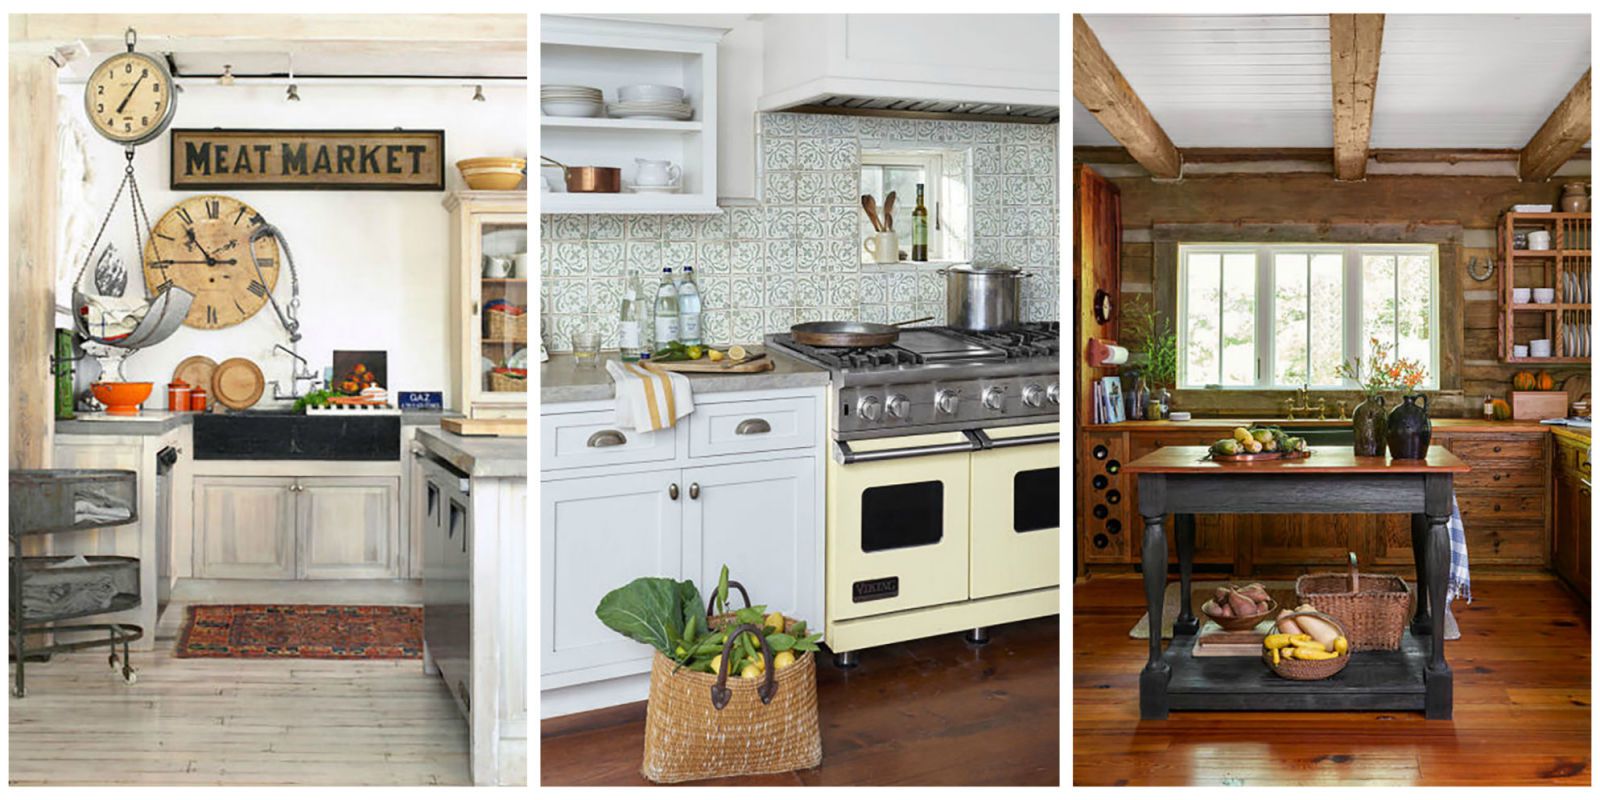 Wooden country style kitchens find more ways to add farmhouse styleto every room of the house; plus, NPFSMAL